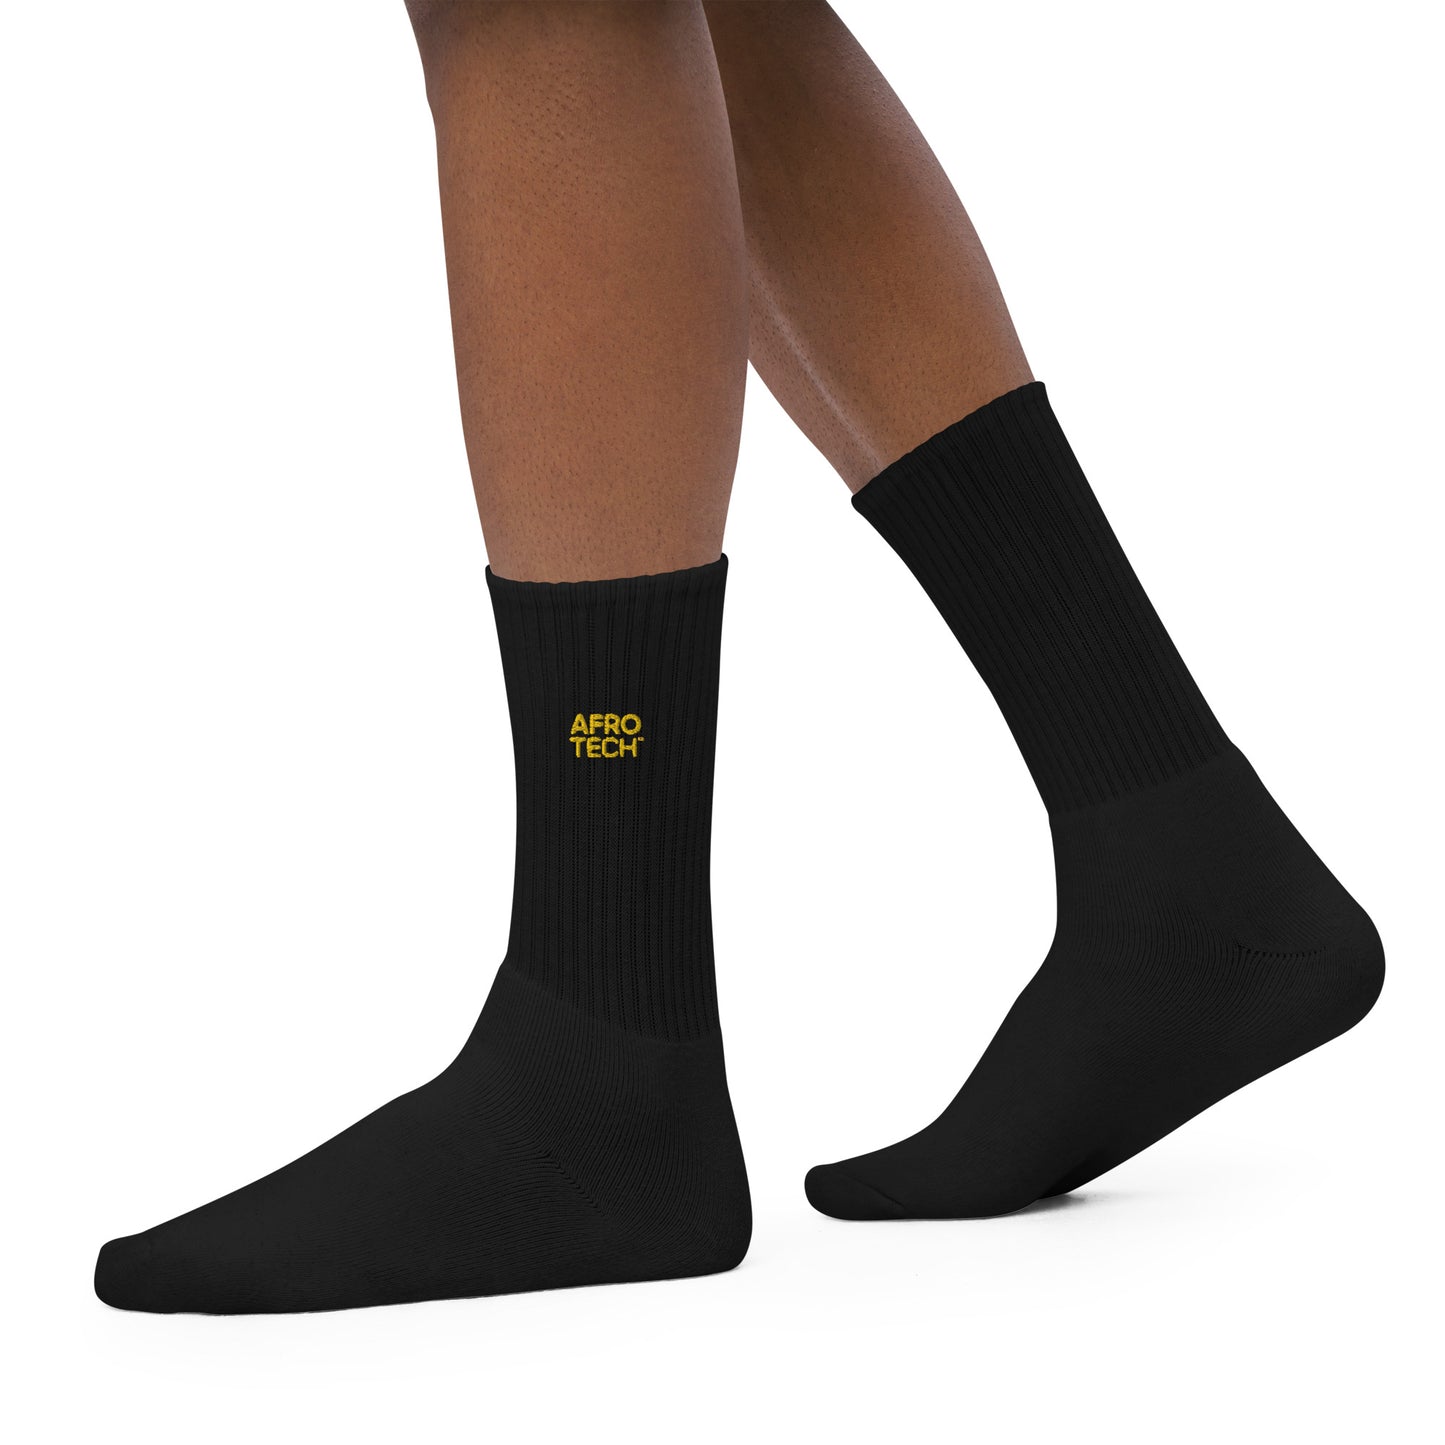 AFROTECH Embroidered socks